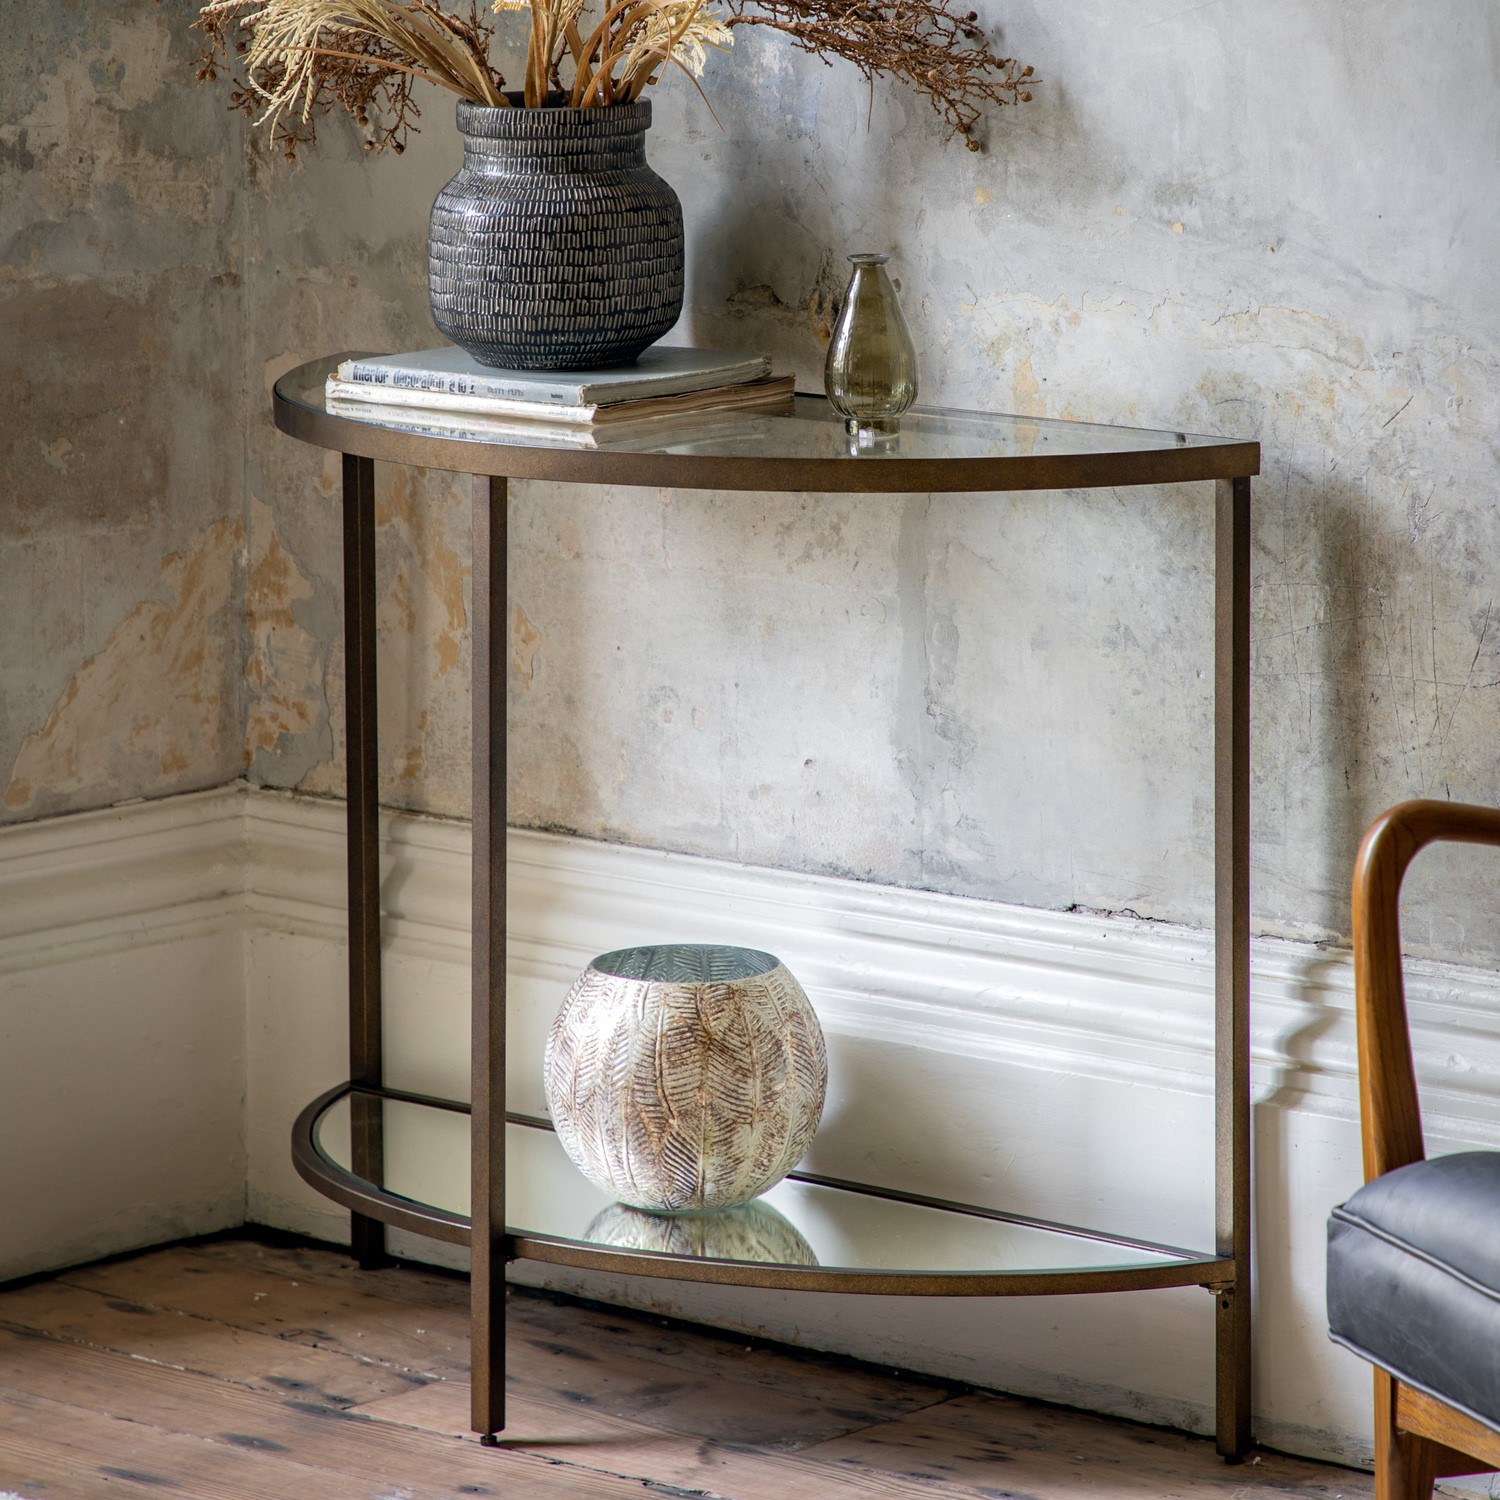 Read more about Hudson glass console table in bronze caspian house